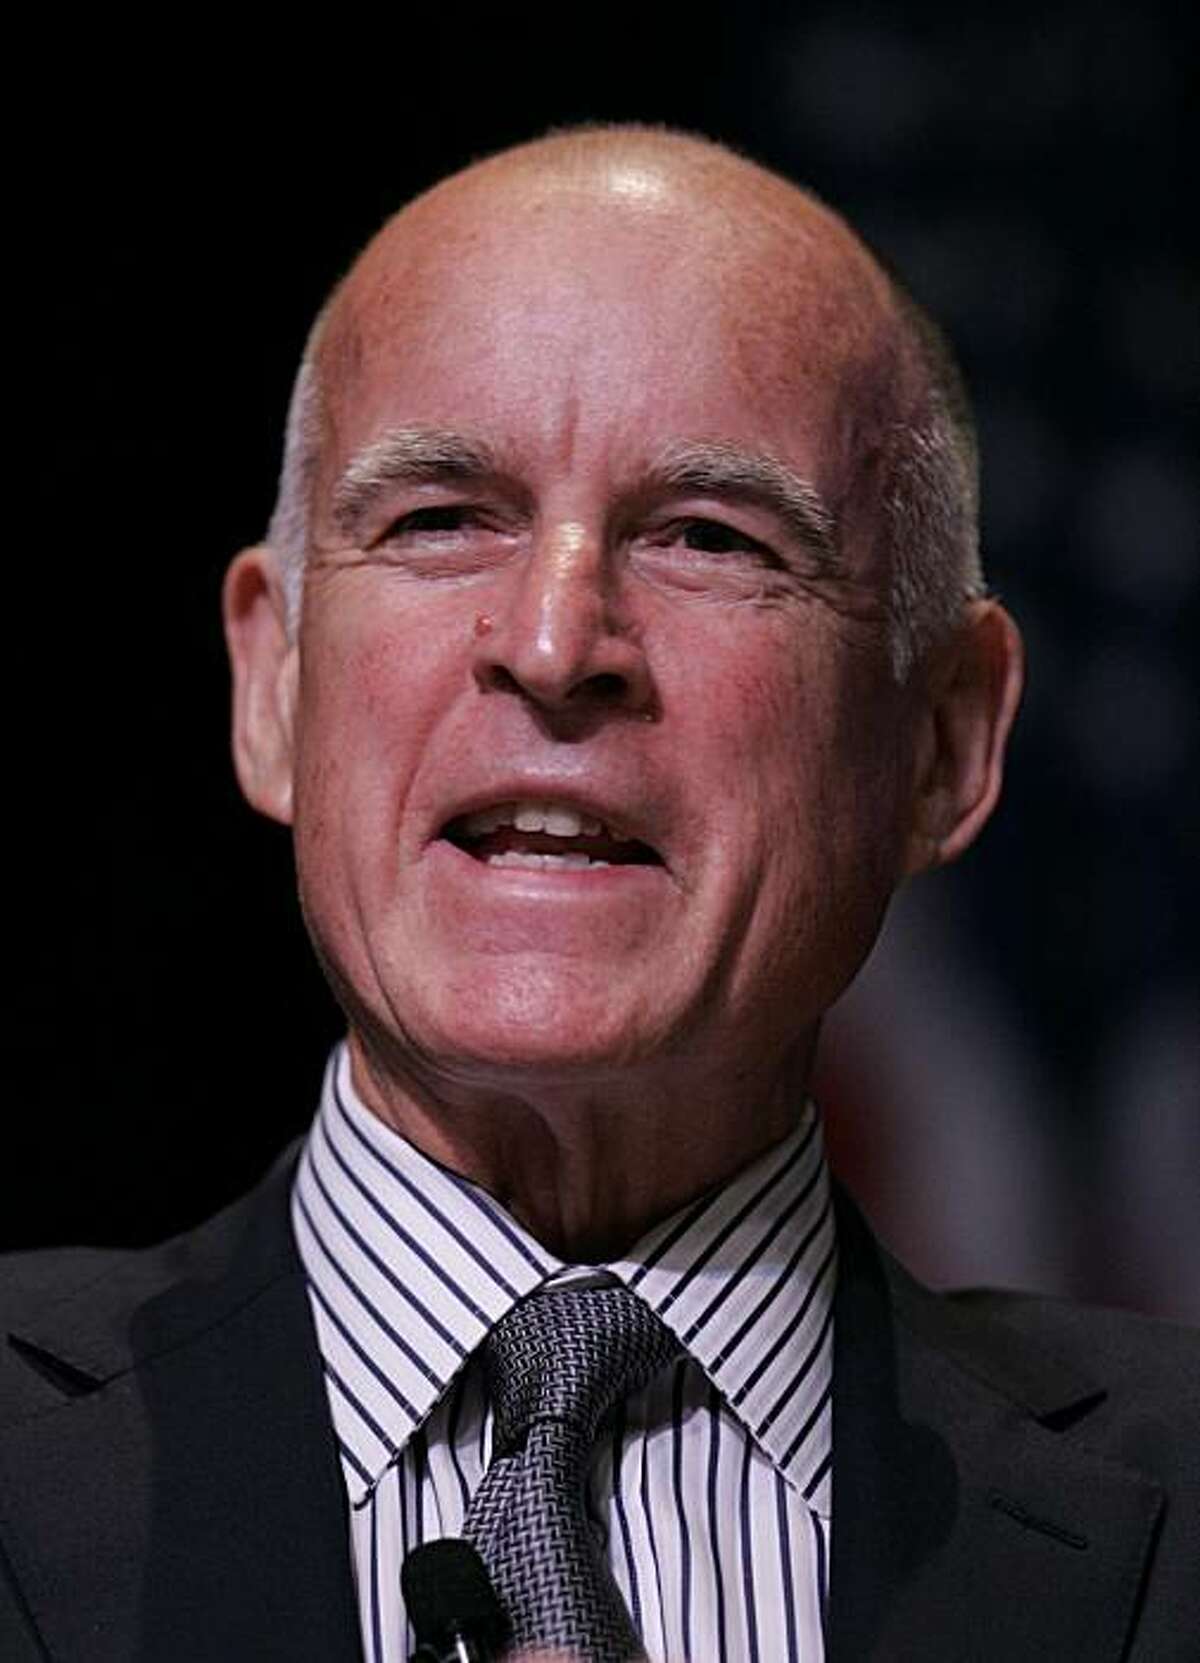 California Attorney General Jerry Brown, who is also running for Governor, smiles during panel discussion at Santa Clara University in Santa Clara, Calif., Wednesday, Sept. 16, 2009.